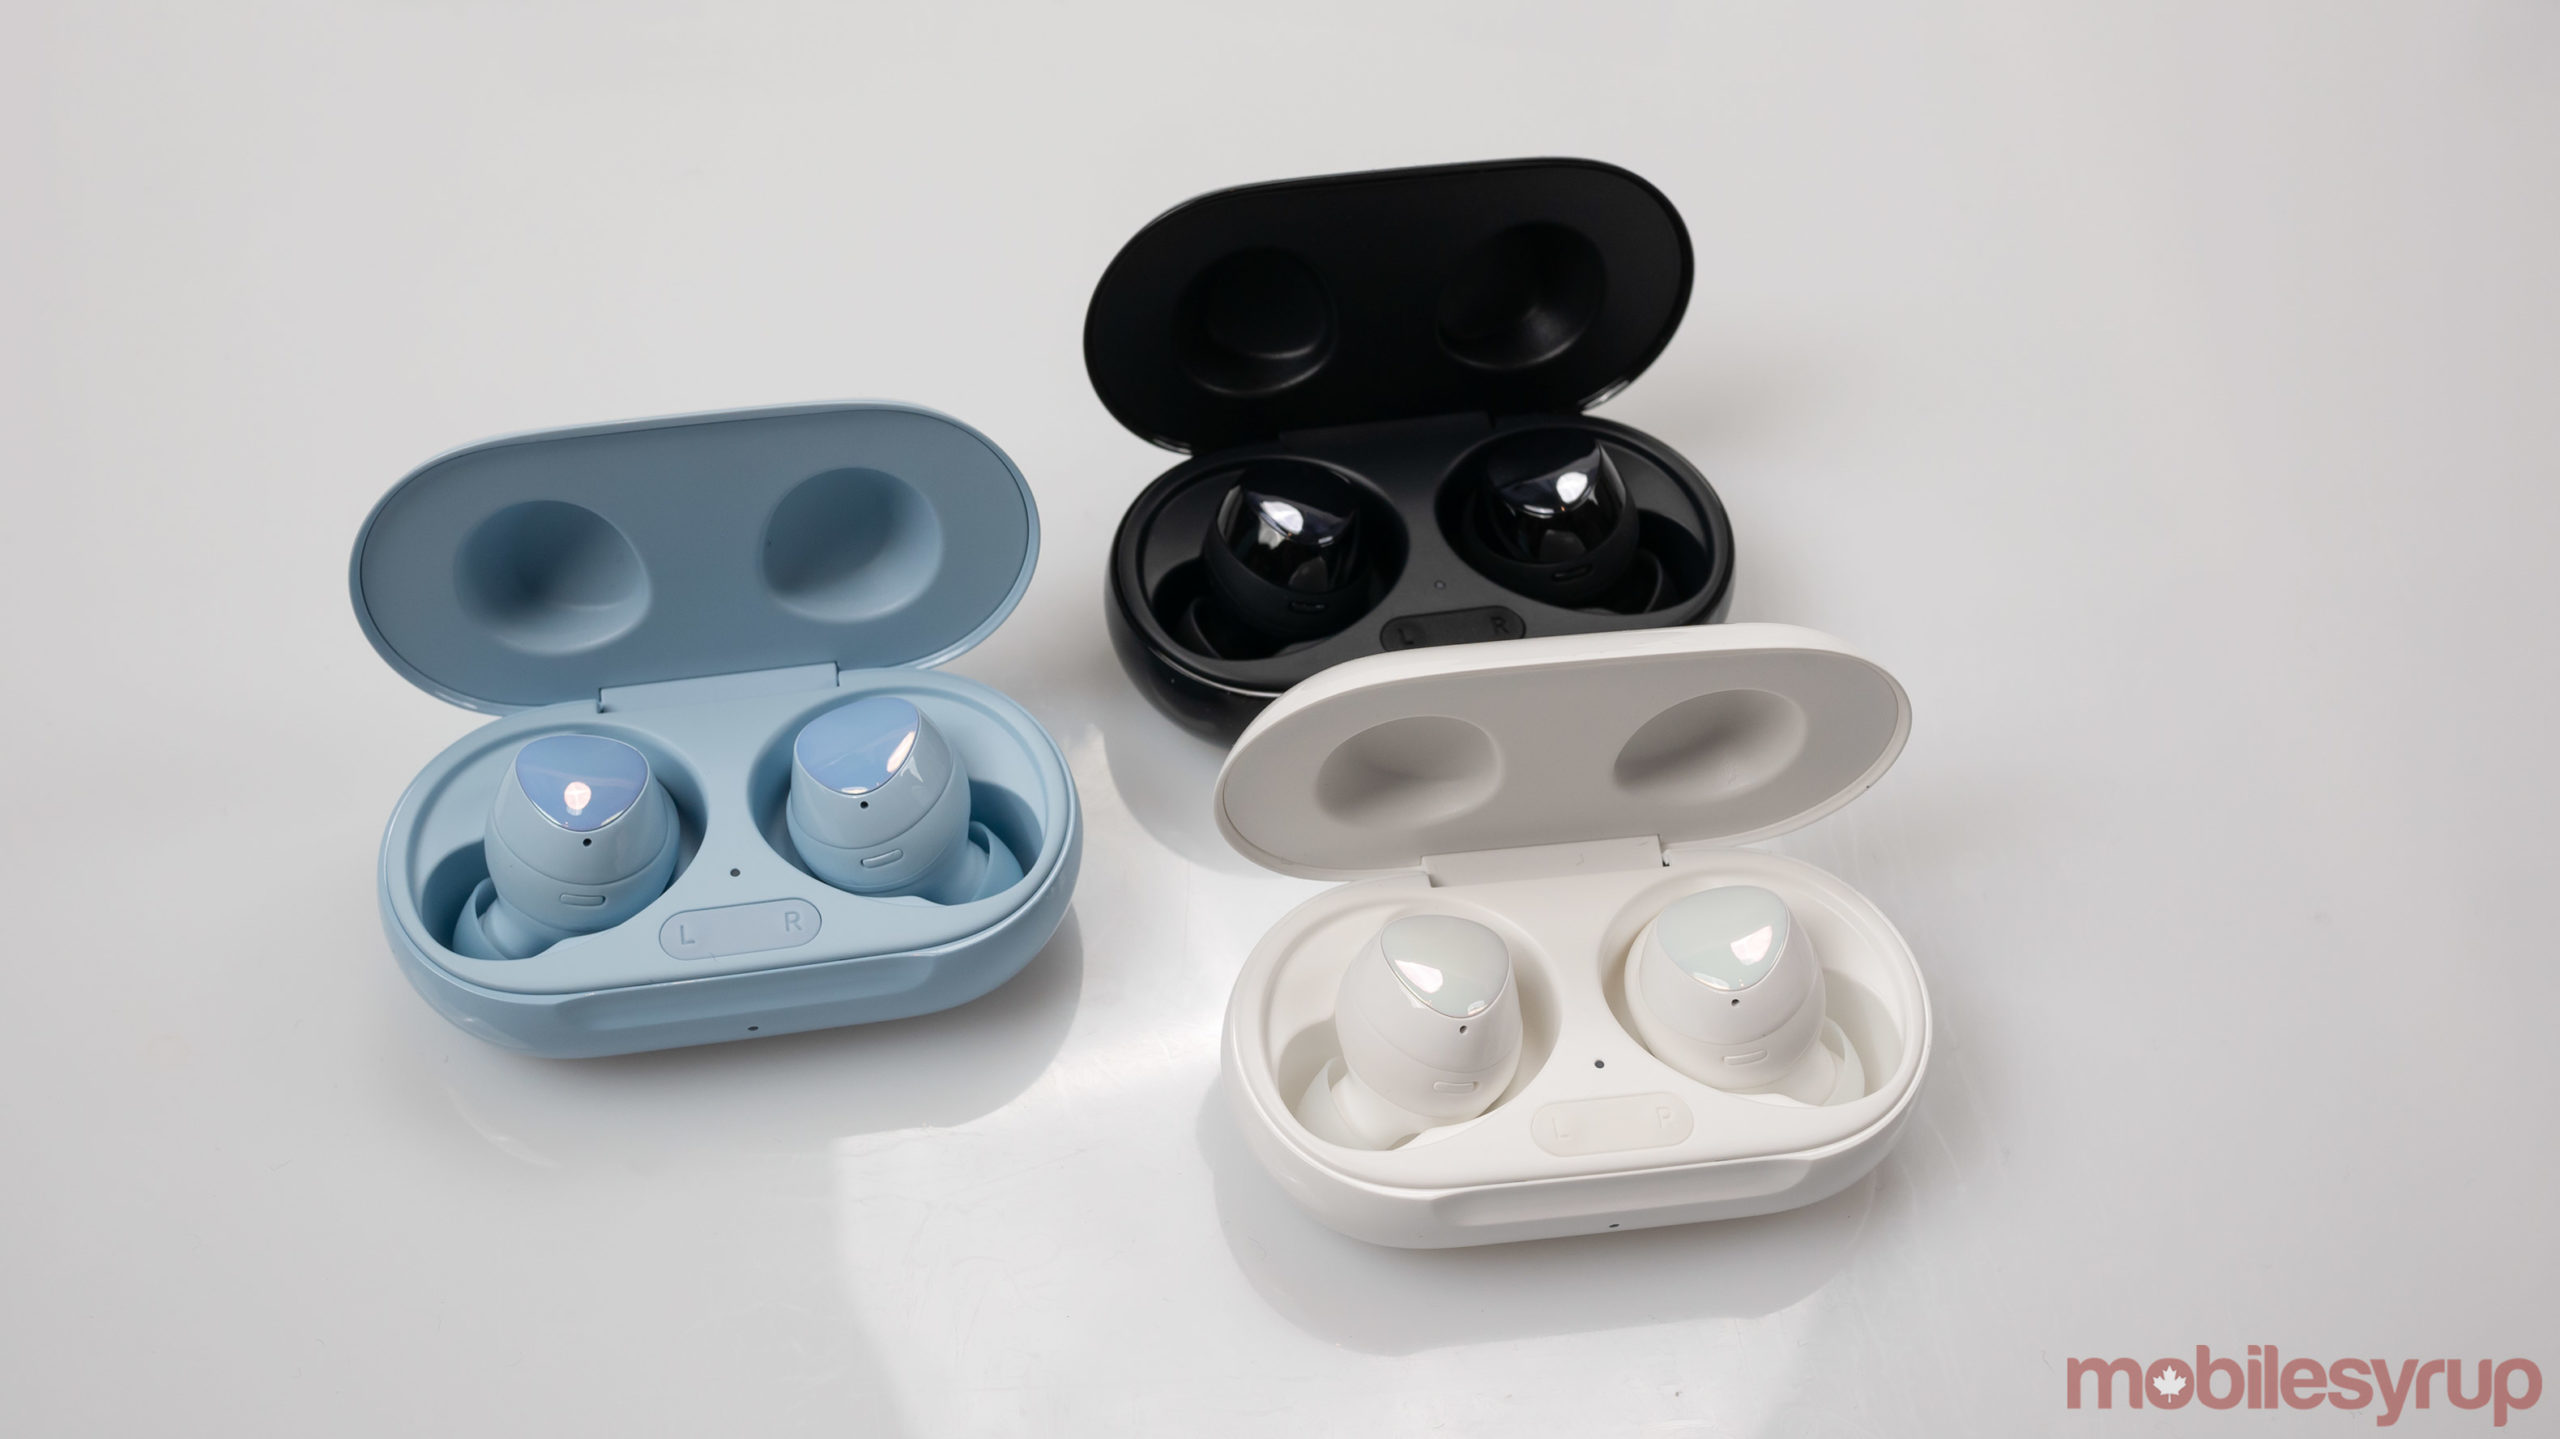 Samsung's new Galaxy Buds+ are coming to Canada